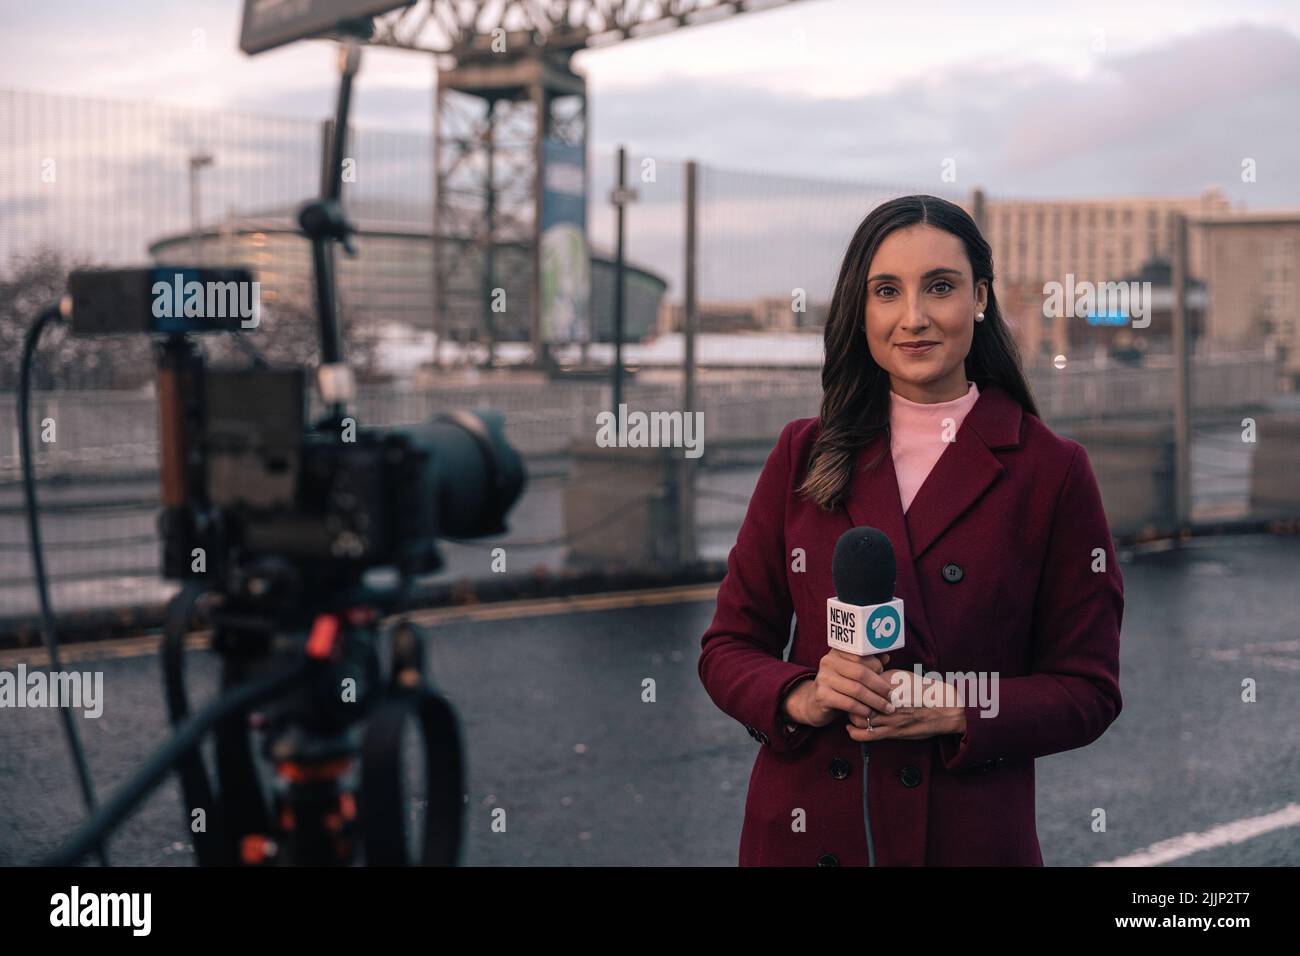 The Australian news reporter. Was reporting on COP26, taken Outside COP 26 on the squinty bridge Has been in Glasgow for a few days. Stock Photo